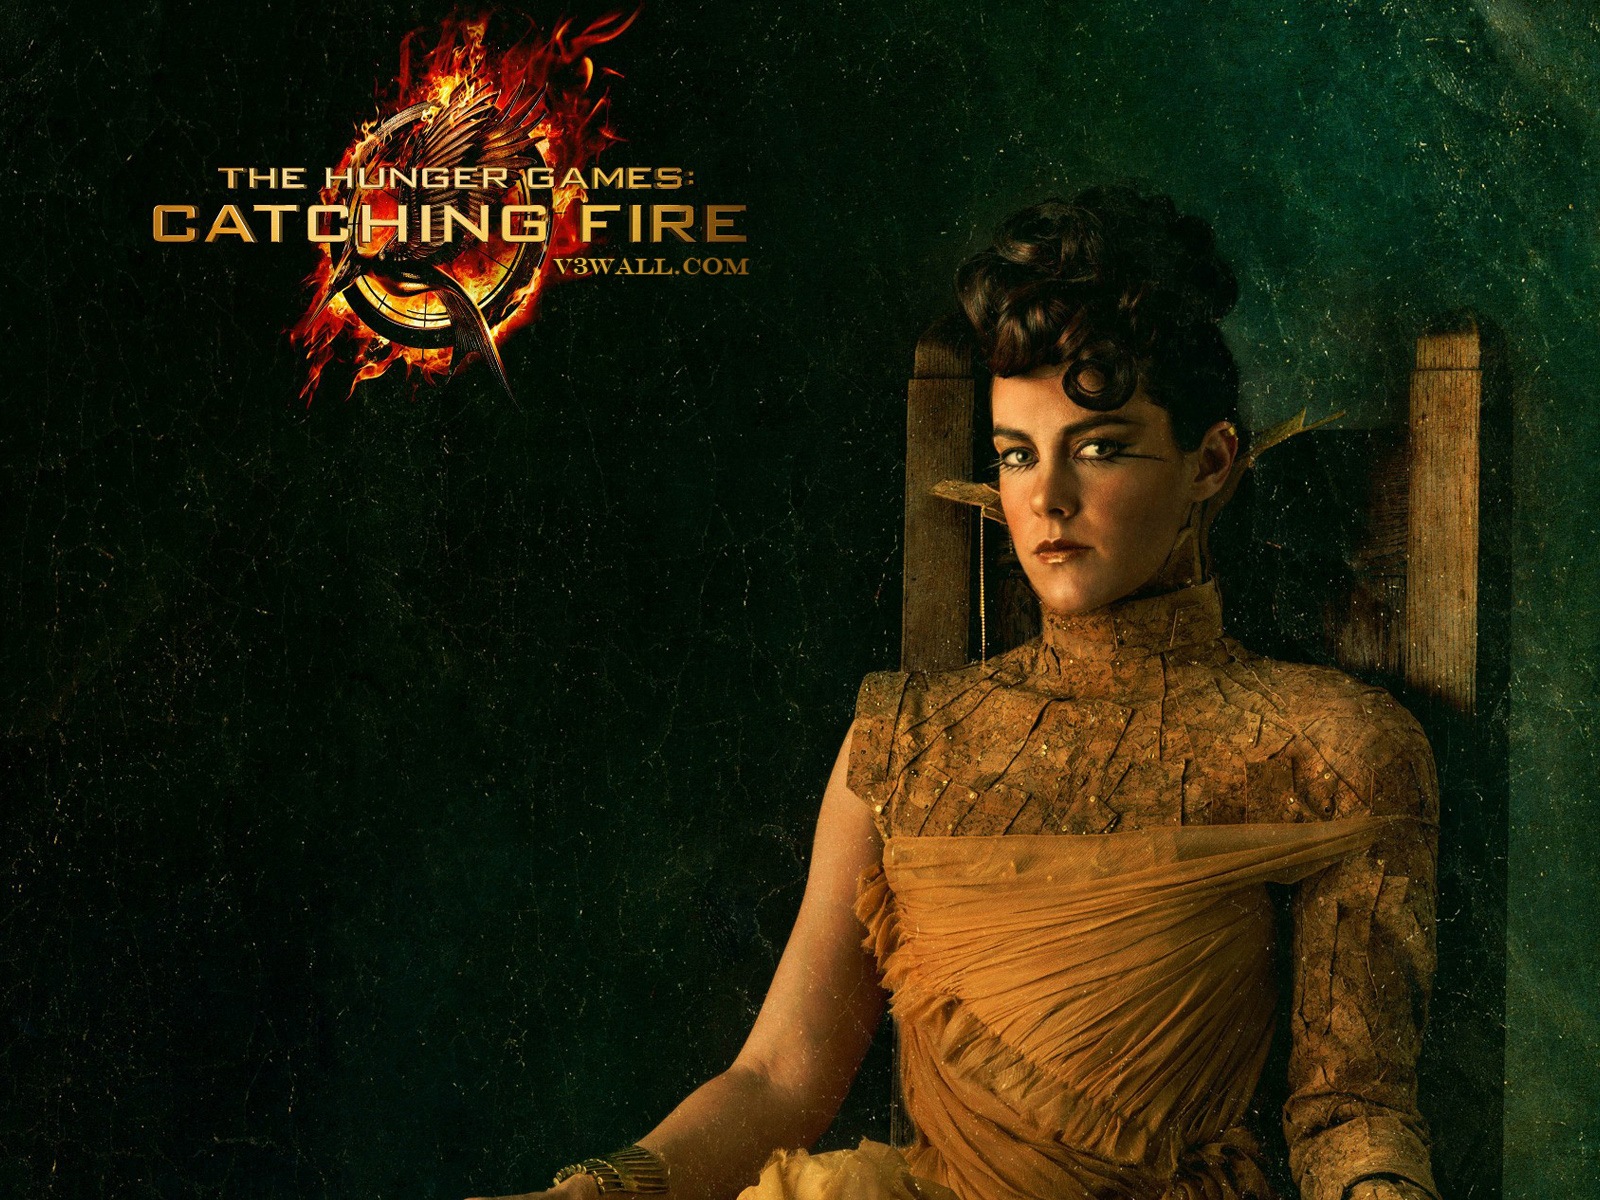 The Hunger Games: Catching Fire wallpapers HD #16 - 1600x1200